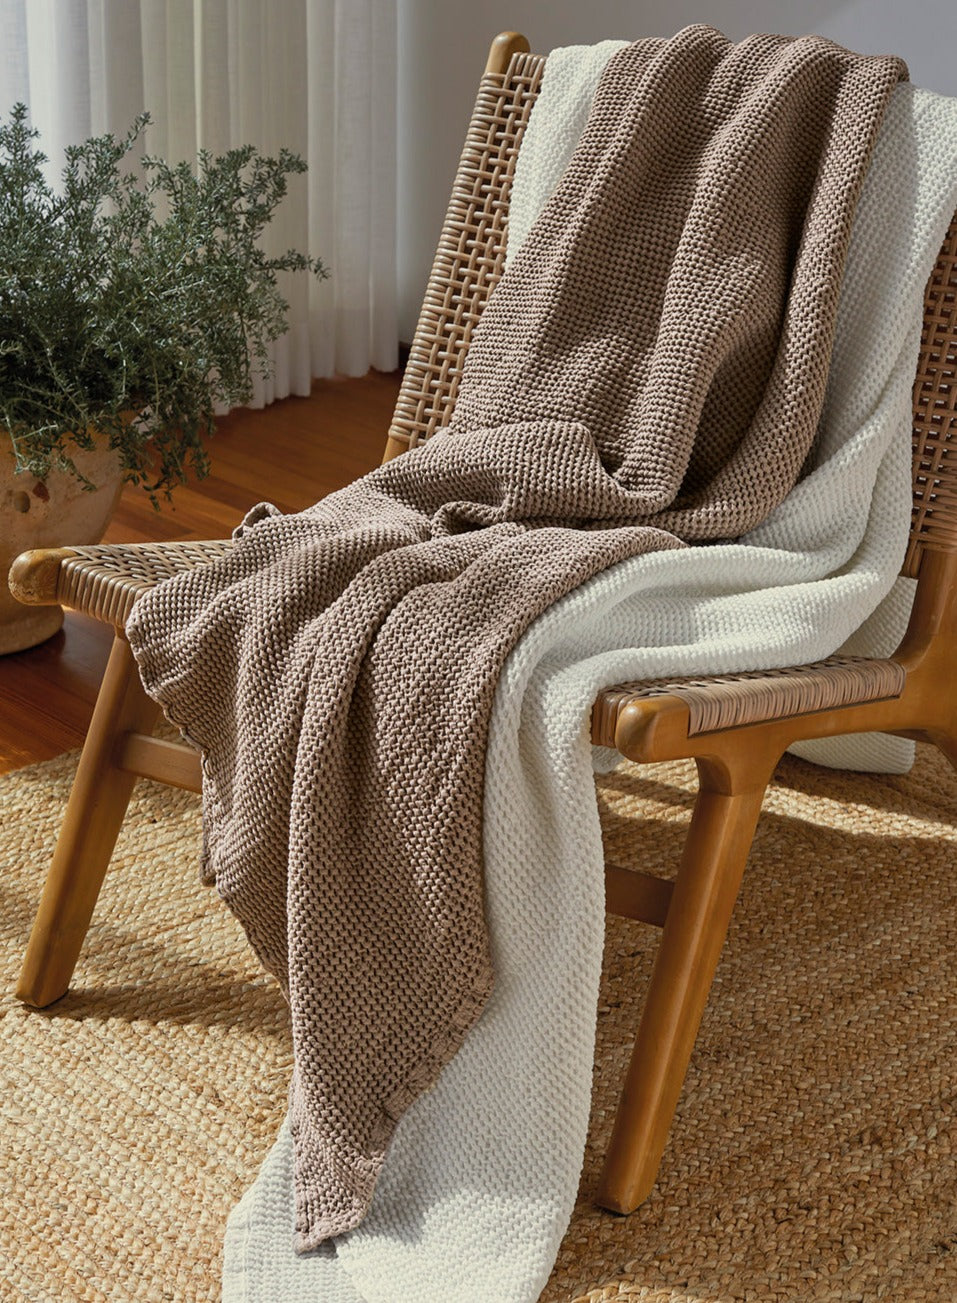 Wrap yourself in luxury with SOWL Home's Mocha Organic Cotton Throw Blanket. Made from premium organic cotton, this cozy throw offers warmth and style for your home.